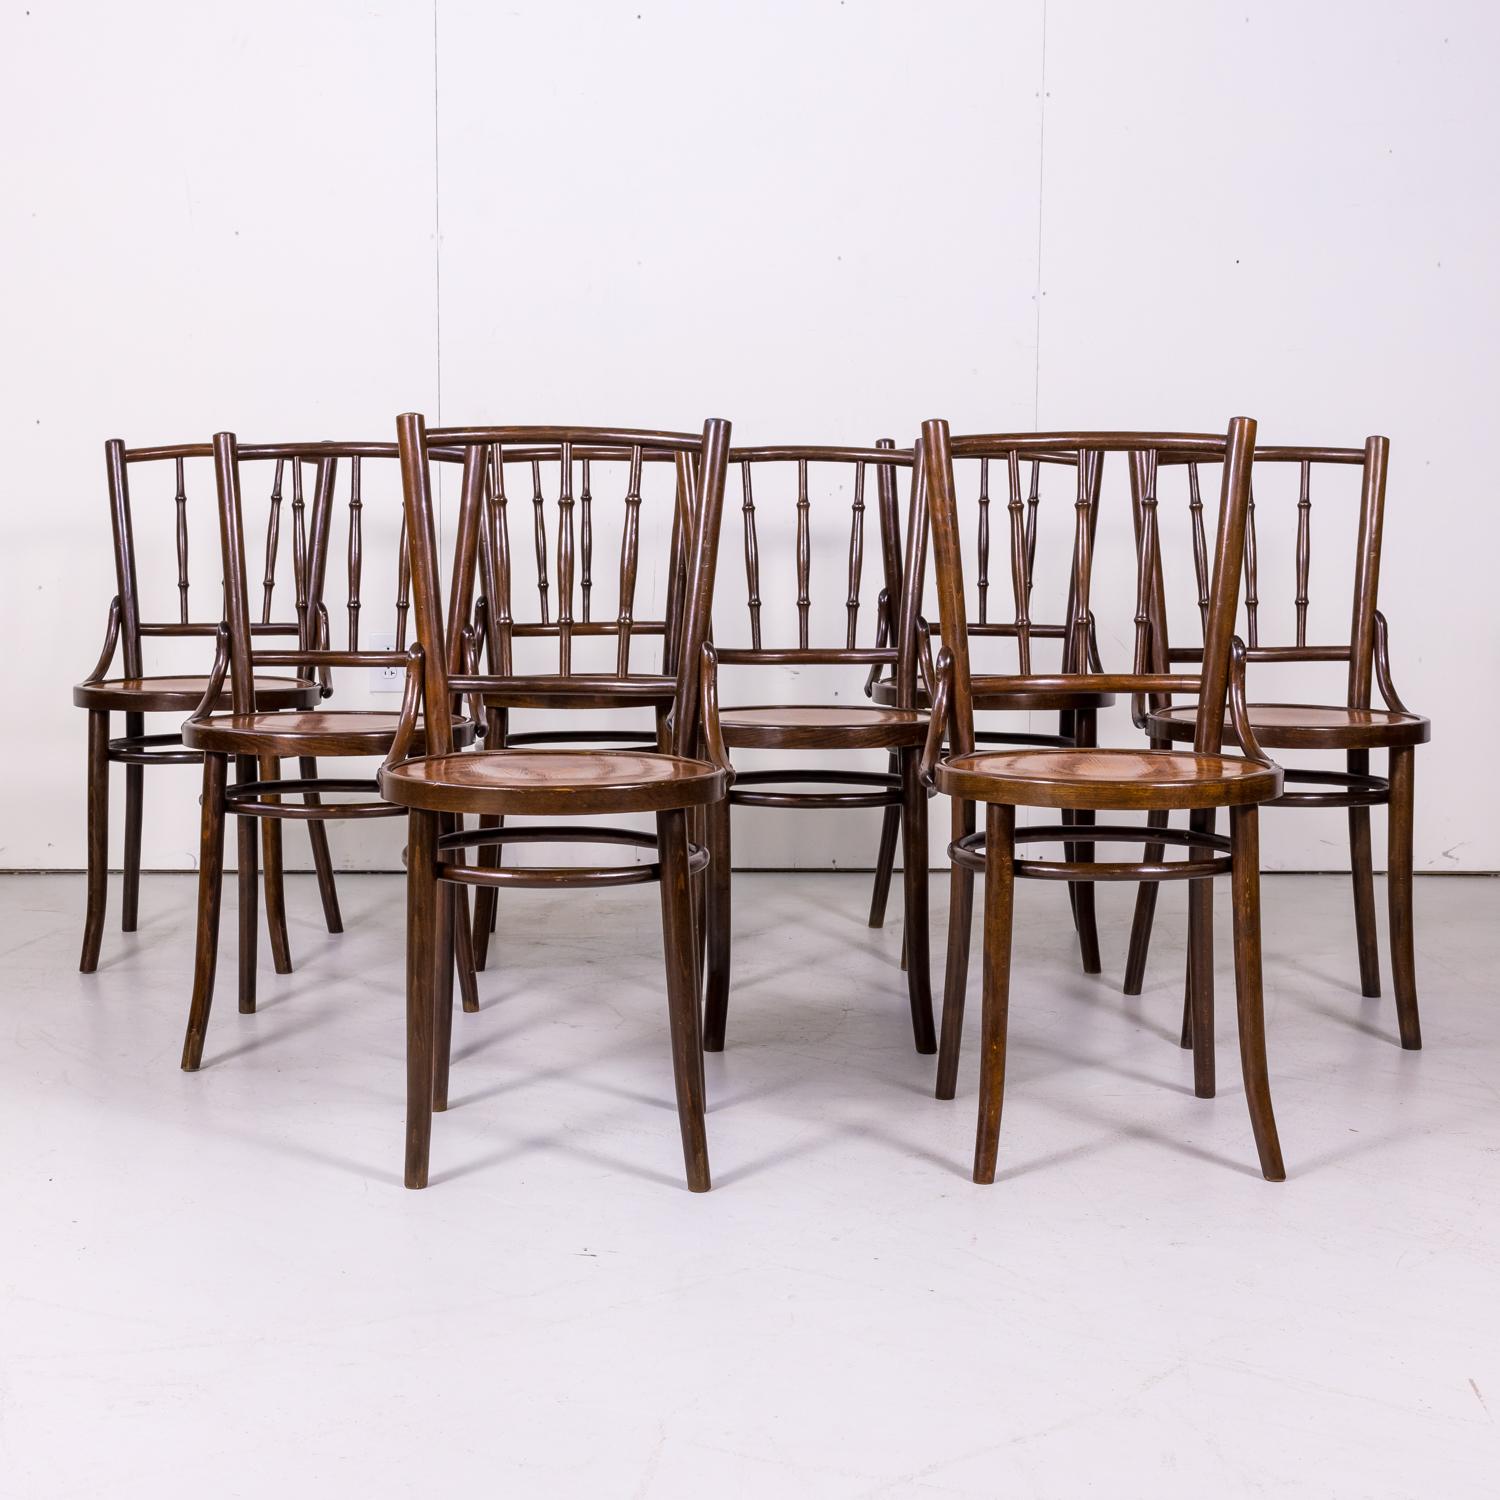 Set of eight Classic bentwood cafe chairs by Mundus and J. & J. Kohn in the Vienna Secessionist style, after Thonet, circa 1920s. Having a beechwood frame and embossed/pressed seat featuring lillies and cattails, this wonderful set is raised on